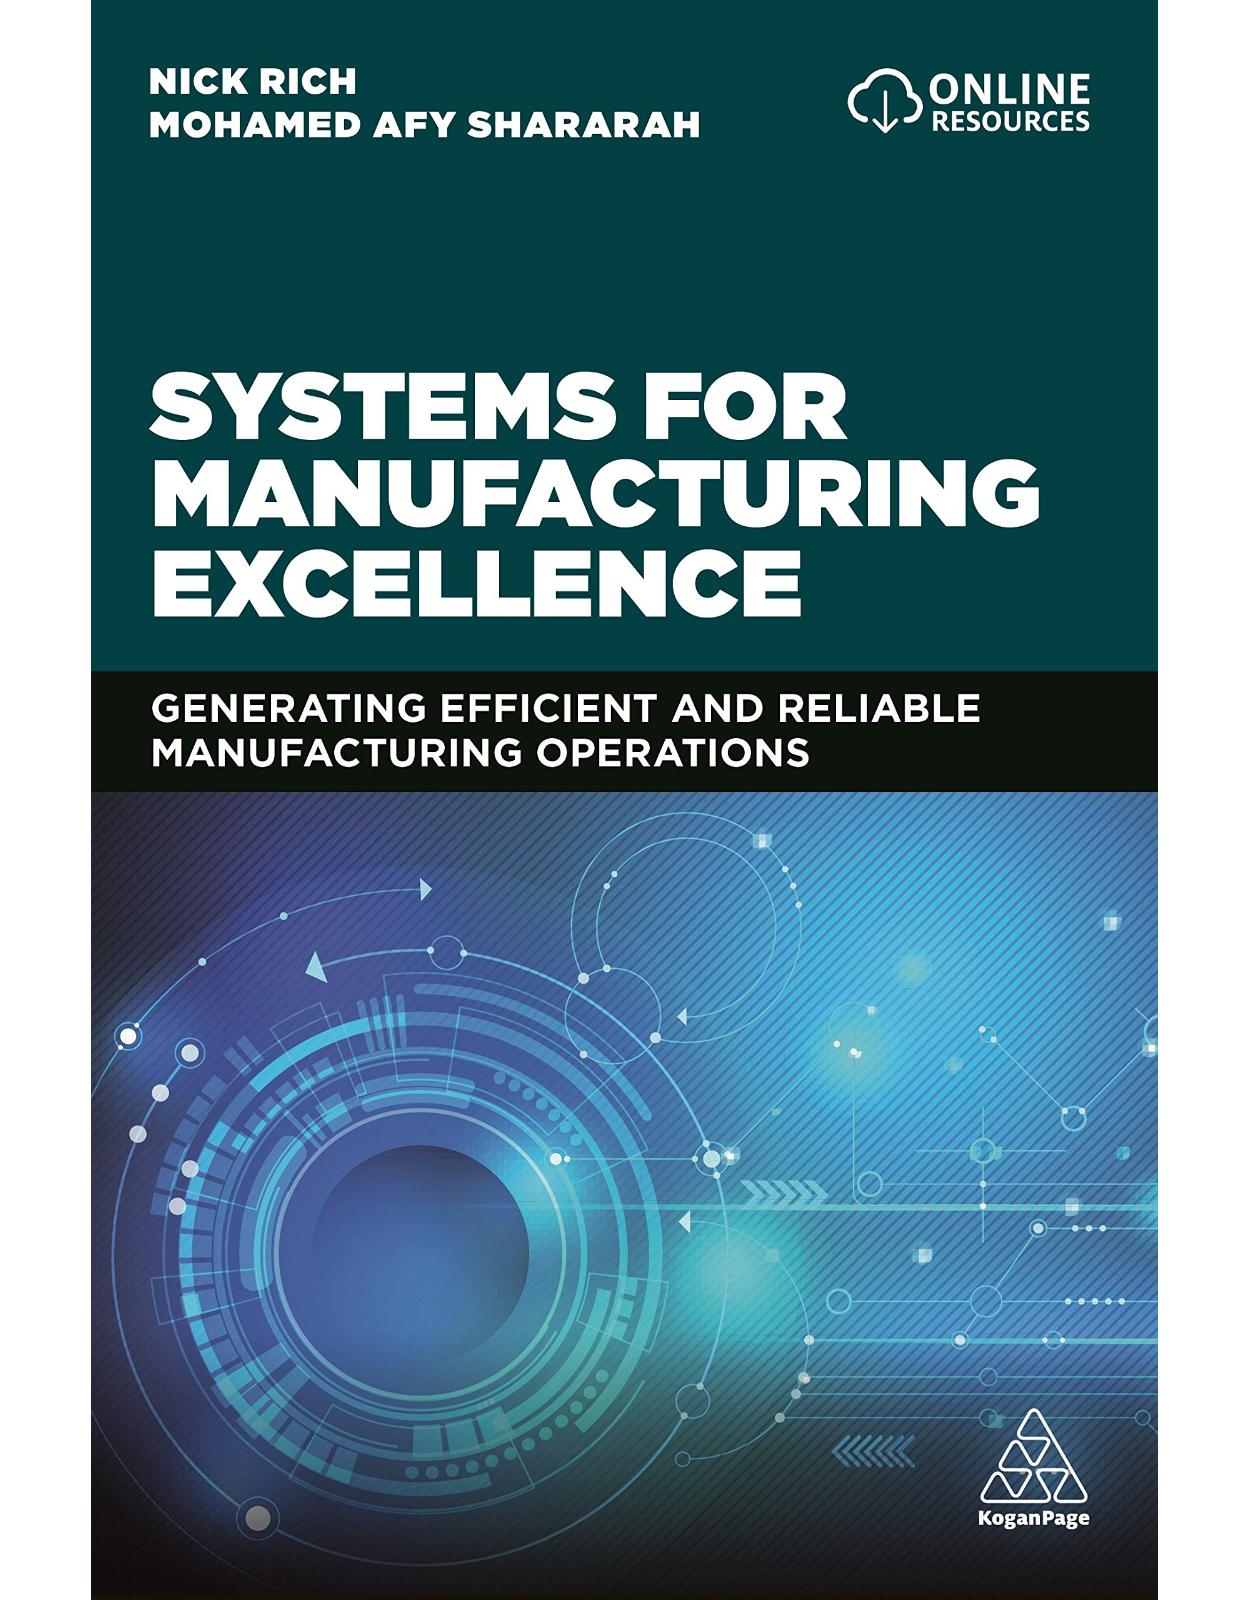 Systems for Manufacturing Excellence: Generating Reliable and Efficient Service Operations